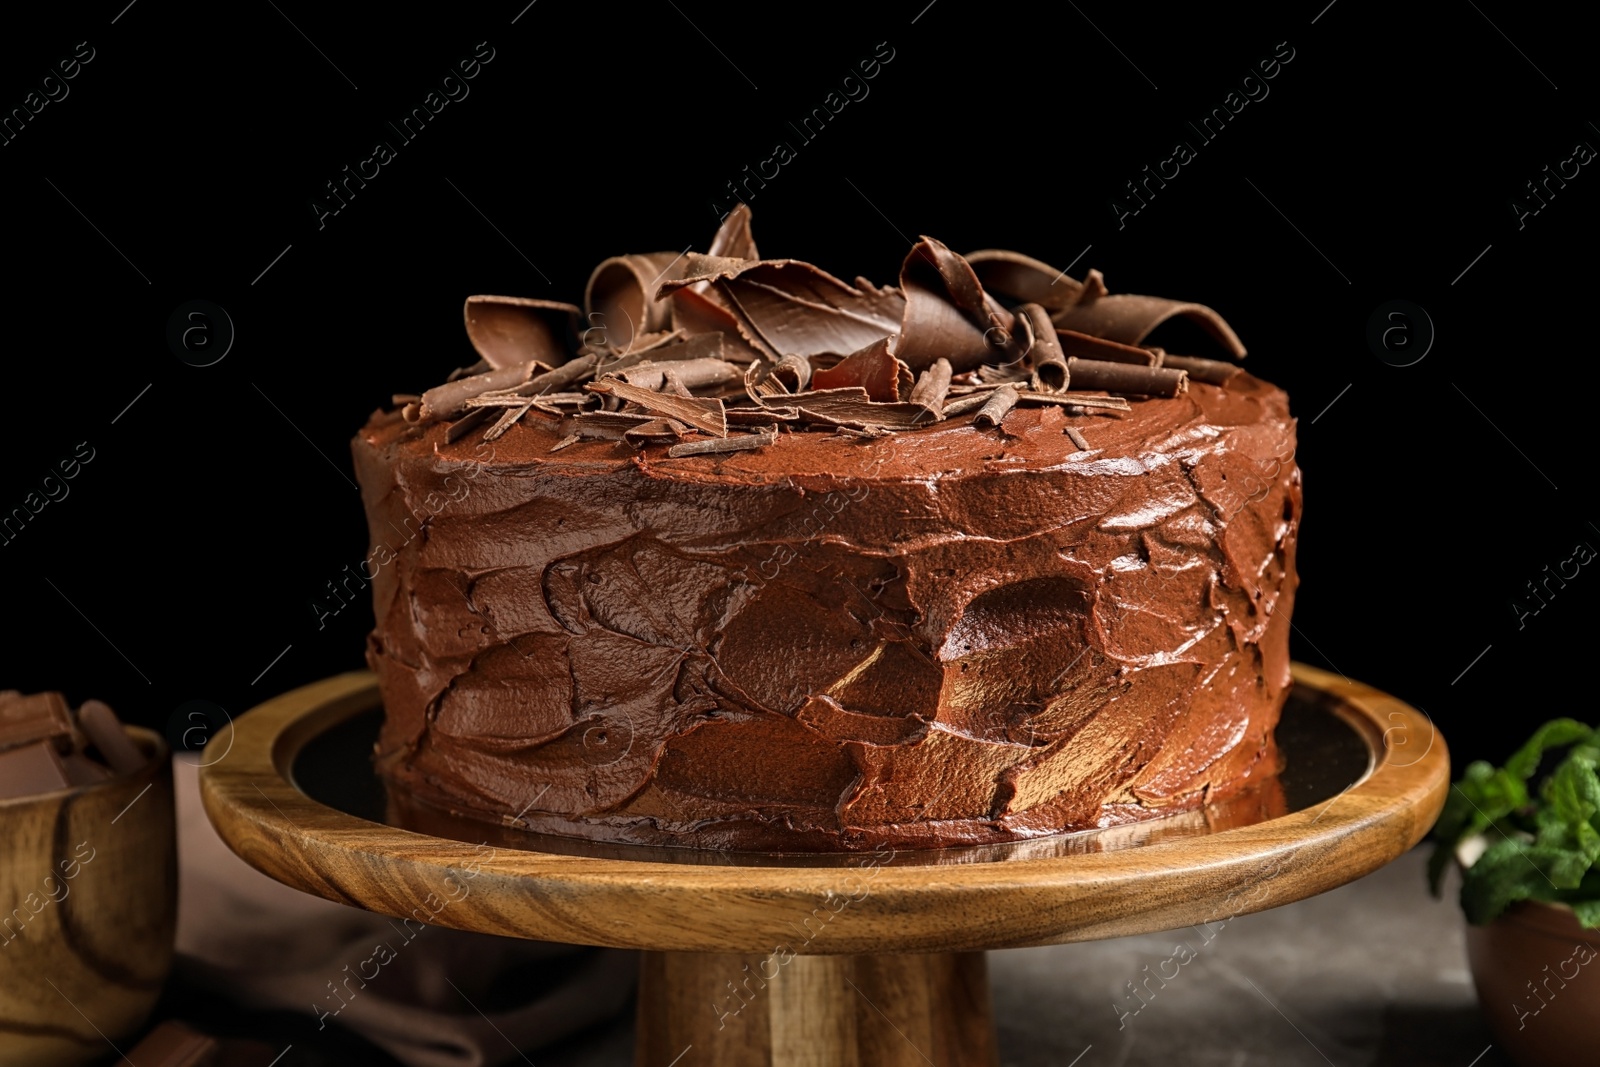 Photo of Stand with tasty homemade chocolate cake on black background